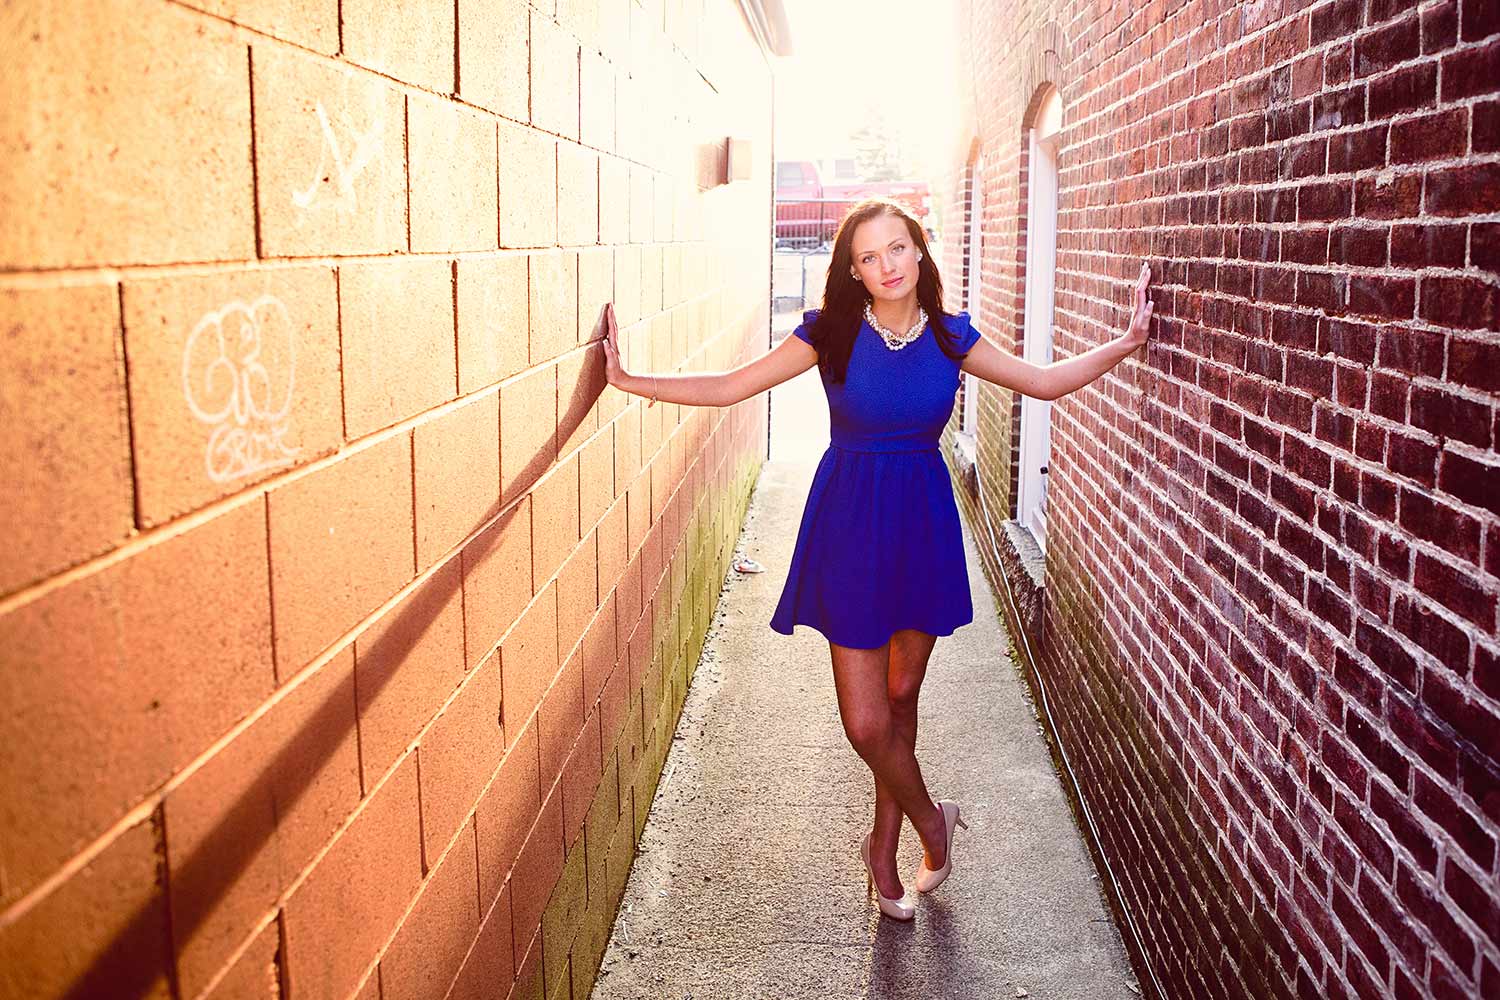 Summer Senior portrait of a young woman in a blue dress with pearls and heels standing in an alleyway in Massachusetts at sunset